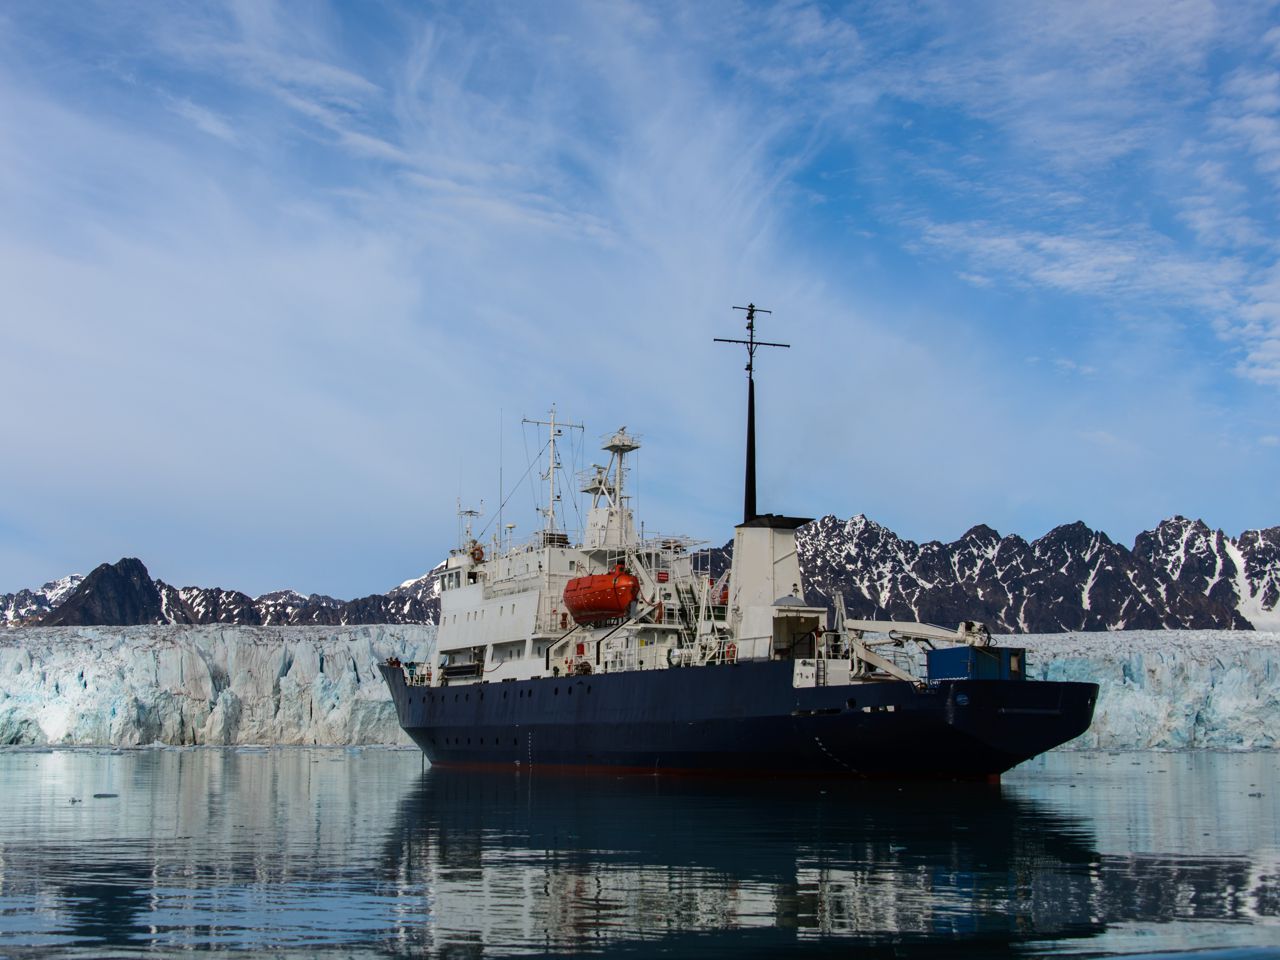 Icebreaker on the water in front of ice and mountain landscape